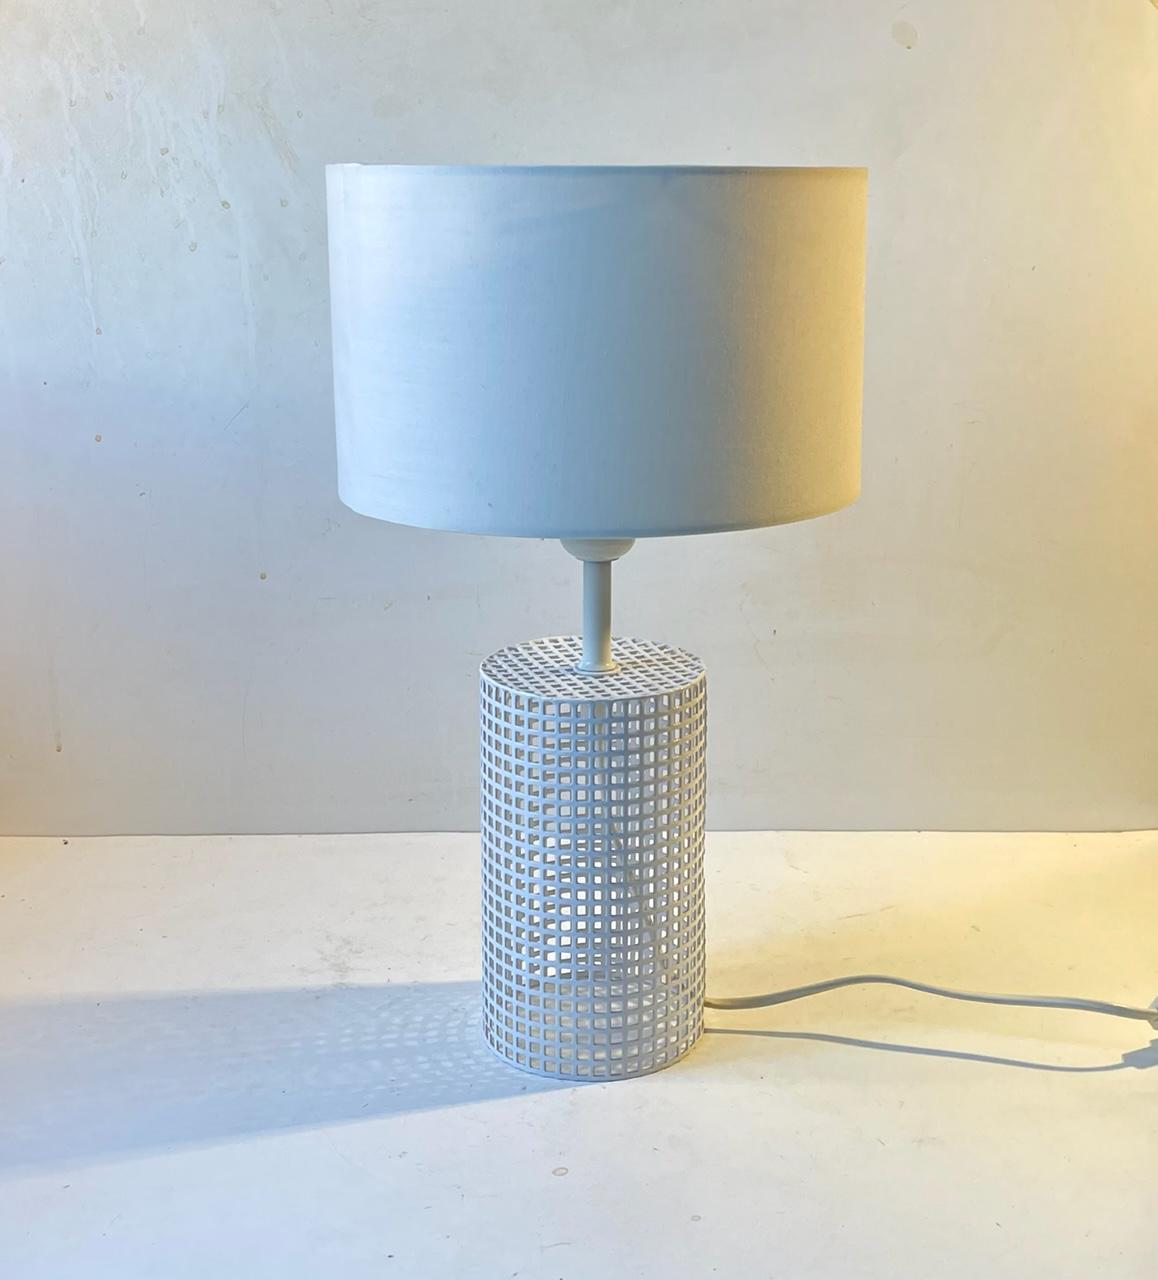 A stylish and clean white table lamp featuring a pierced/perforated metal base set white a cylindrical white textile shade. It has a simple on/of switch to its cord. Designed and manufactured by Laoni Belysning in Denmark during the 1970s in a style